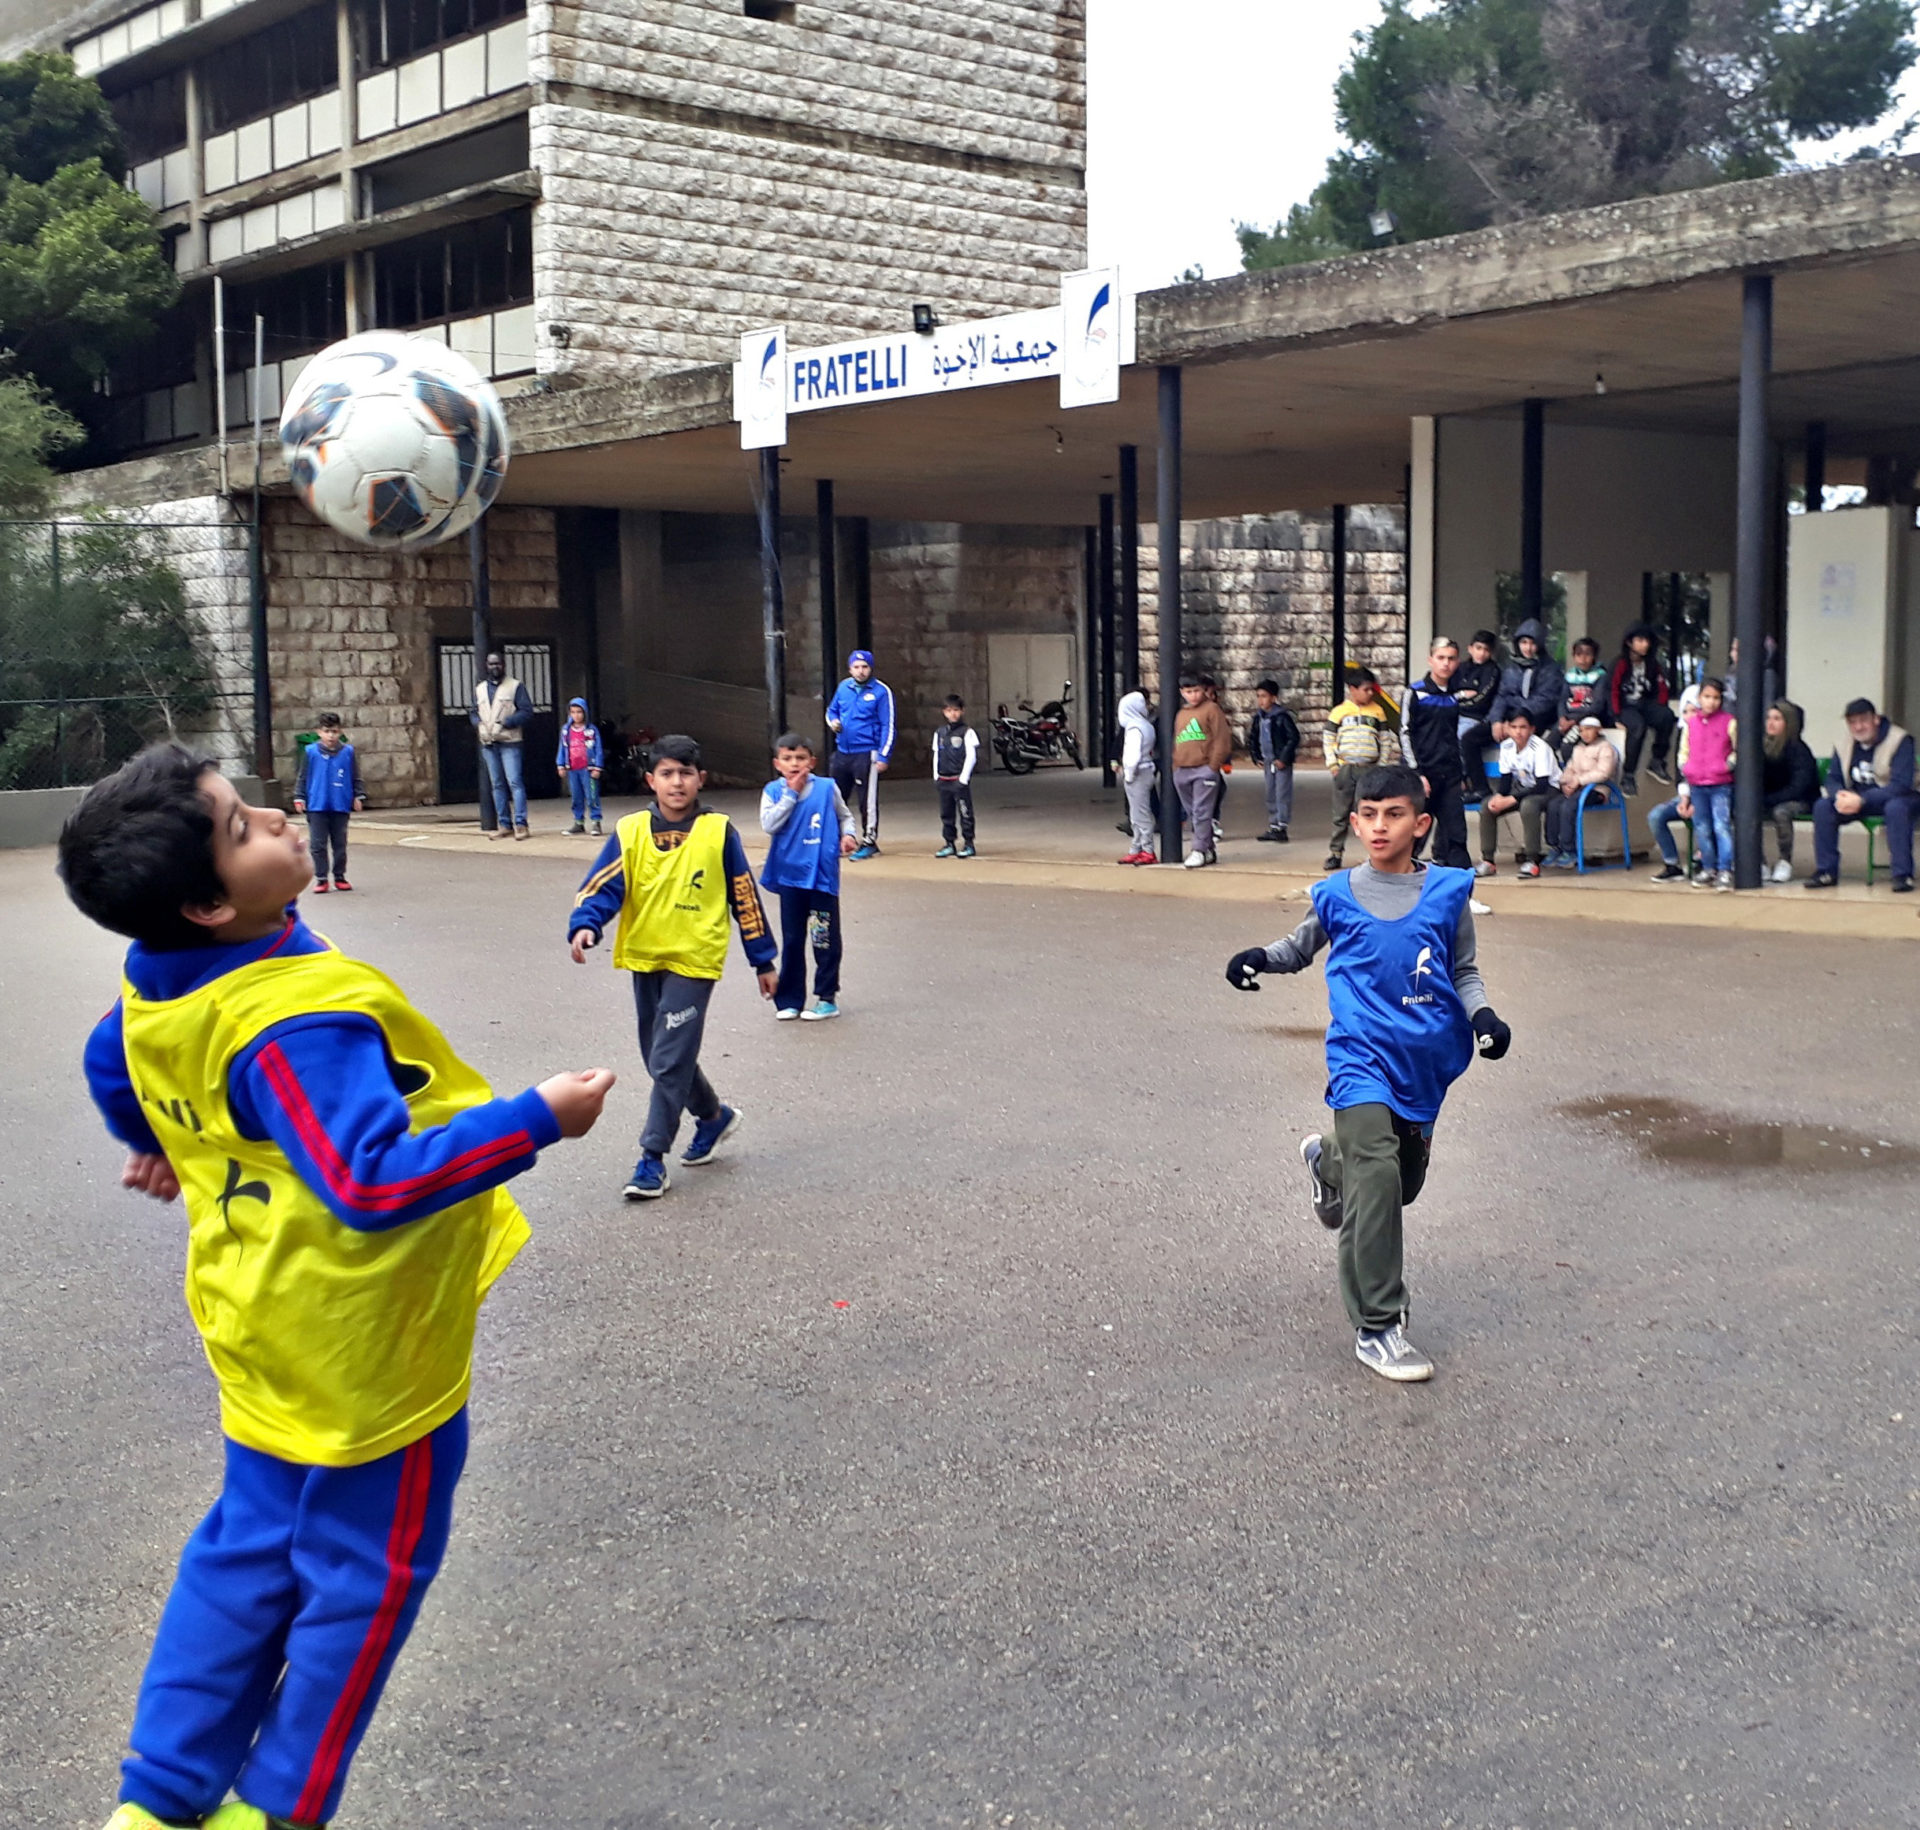 Students playing Football outside the Fratelli centre